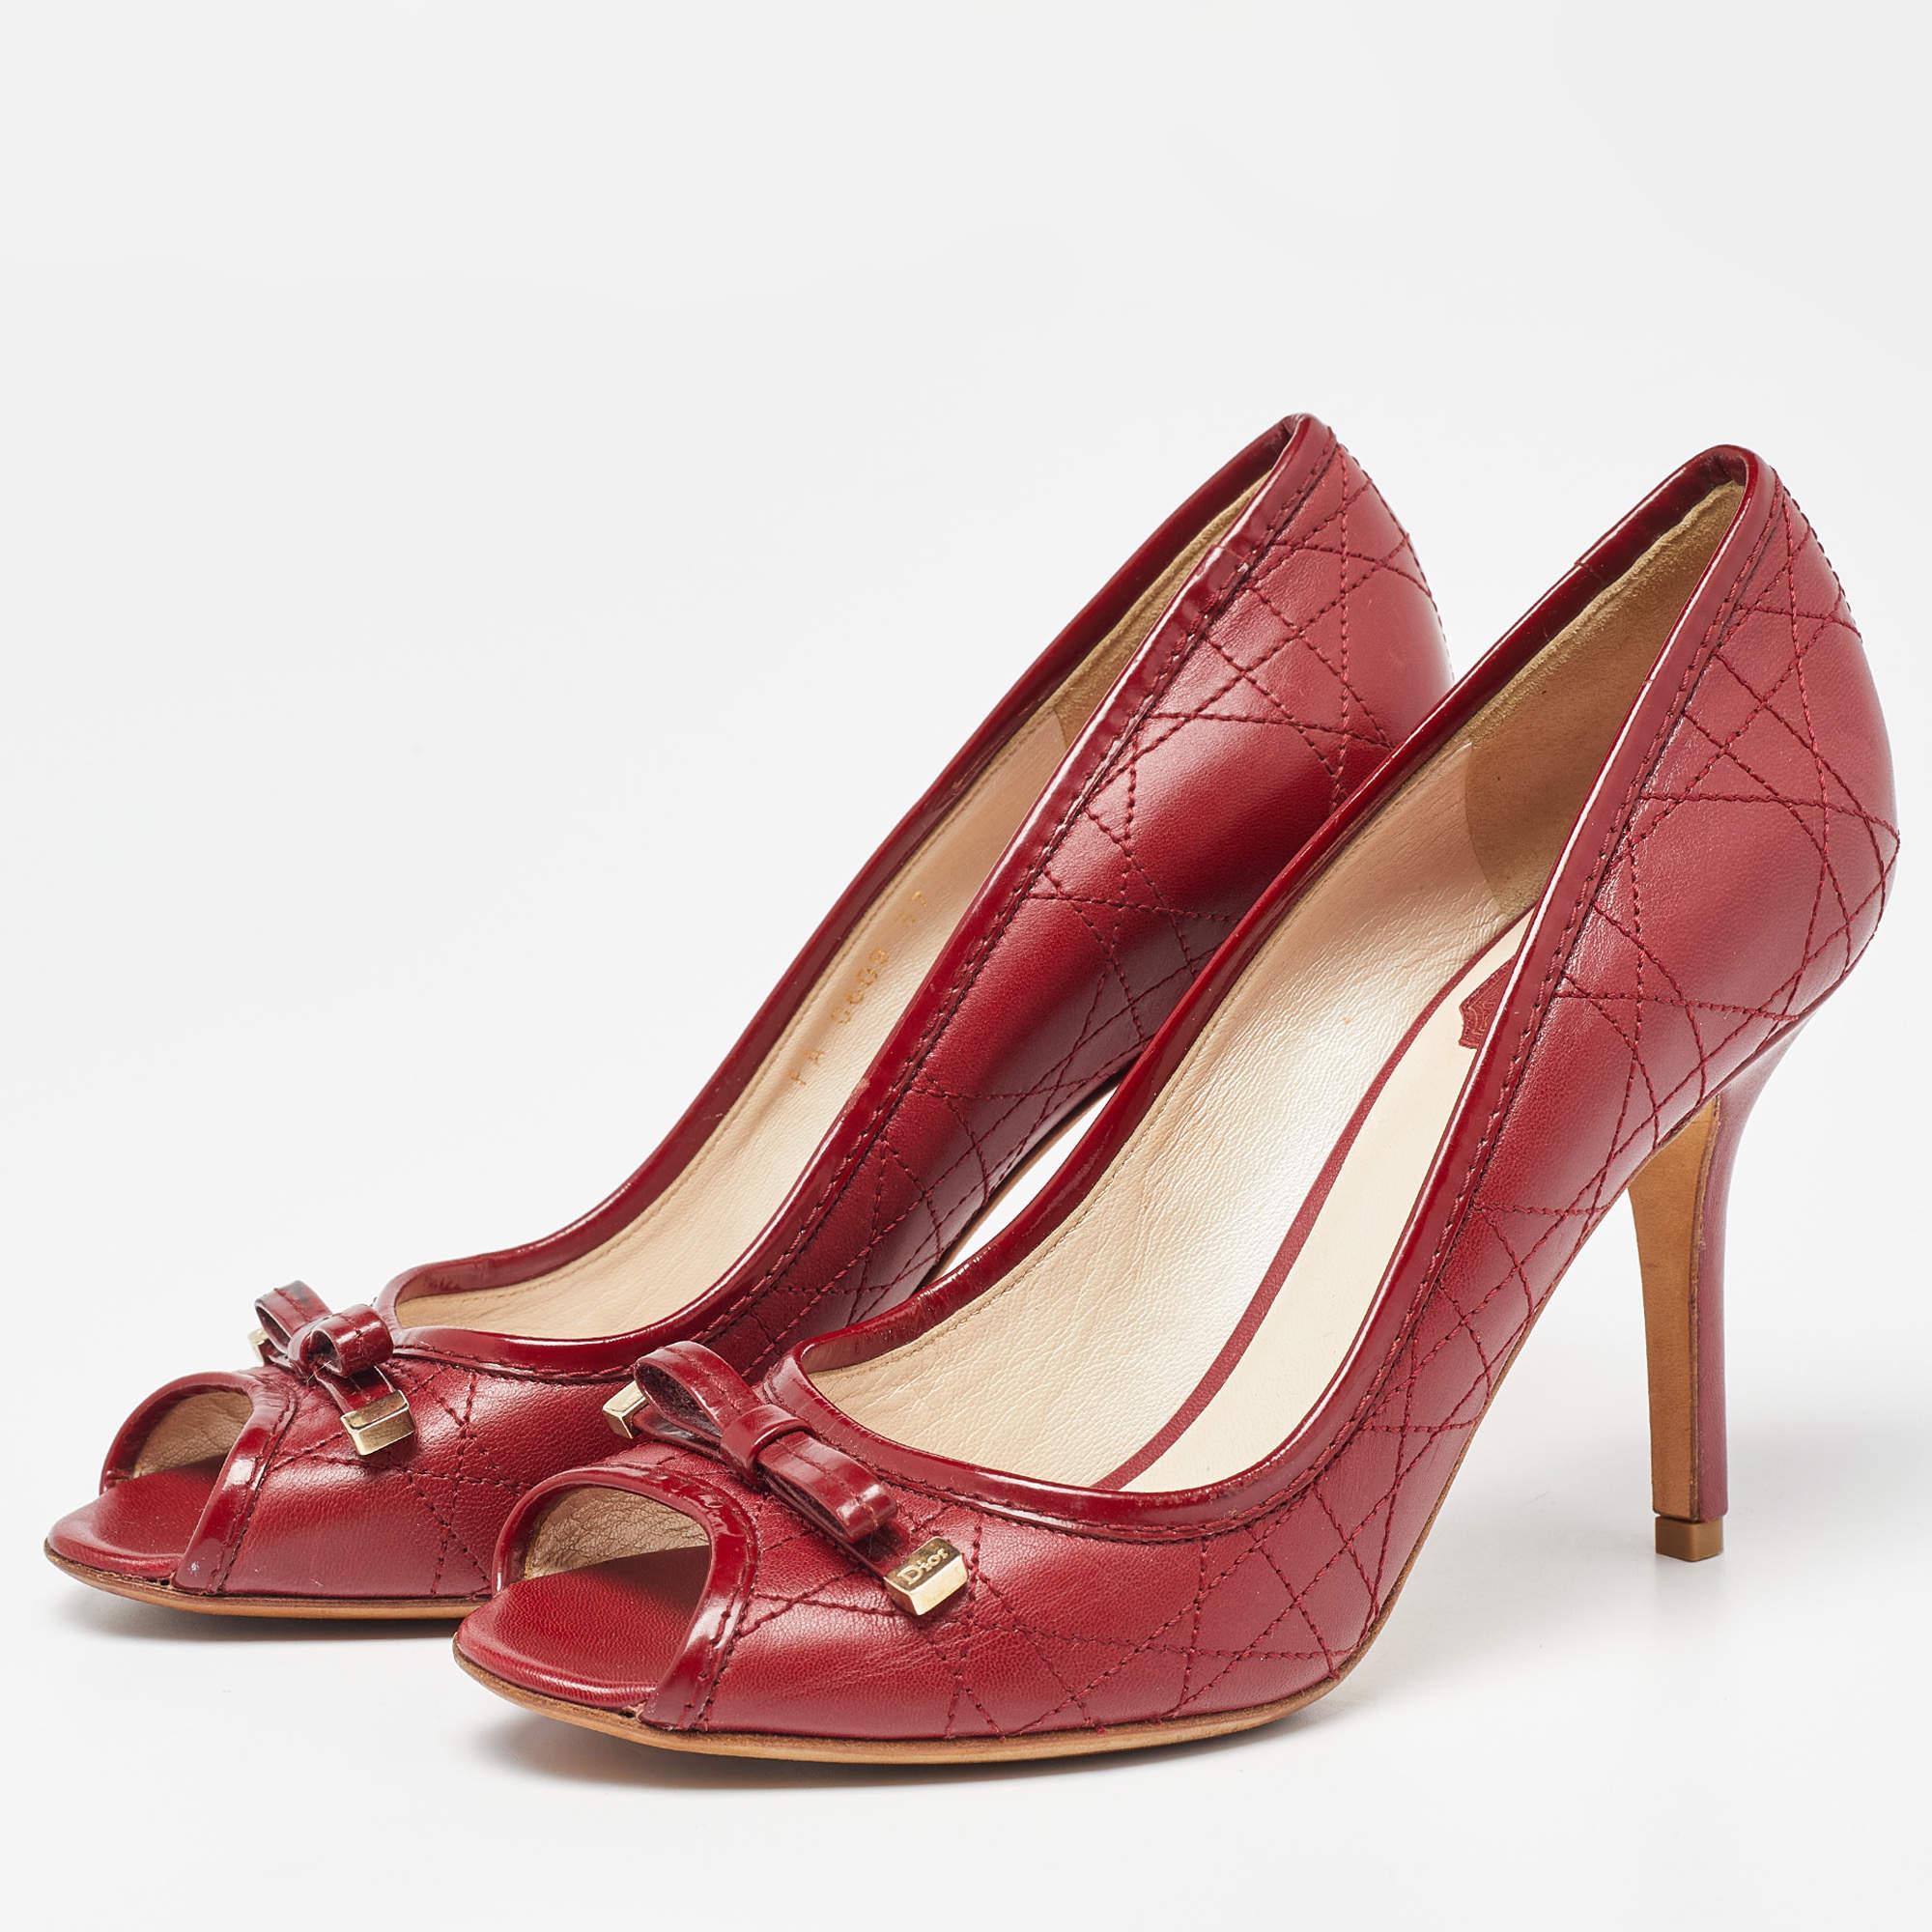 Beautified with Cannage patterns, this pair of Dior pumps is alluring and fashionable. It is crafted from leather with a bow decorating its vamps, and its 9.5cm heels enables a smooth walking experience.

